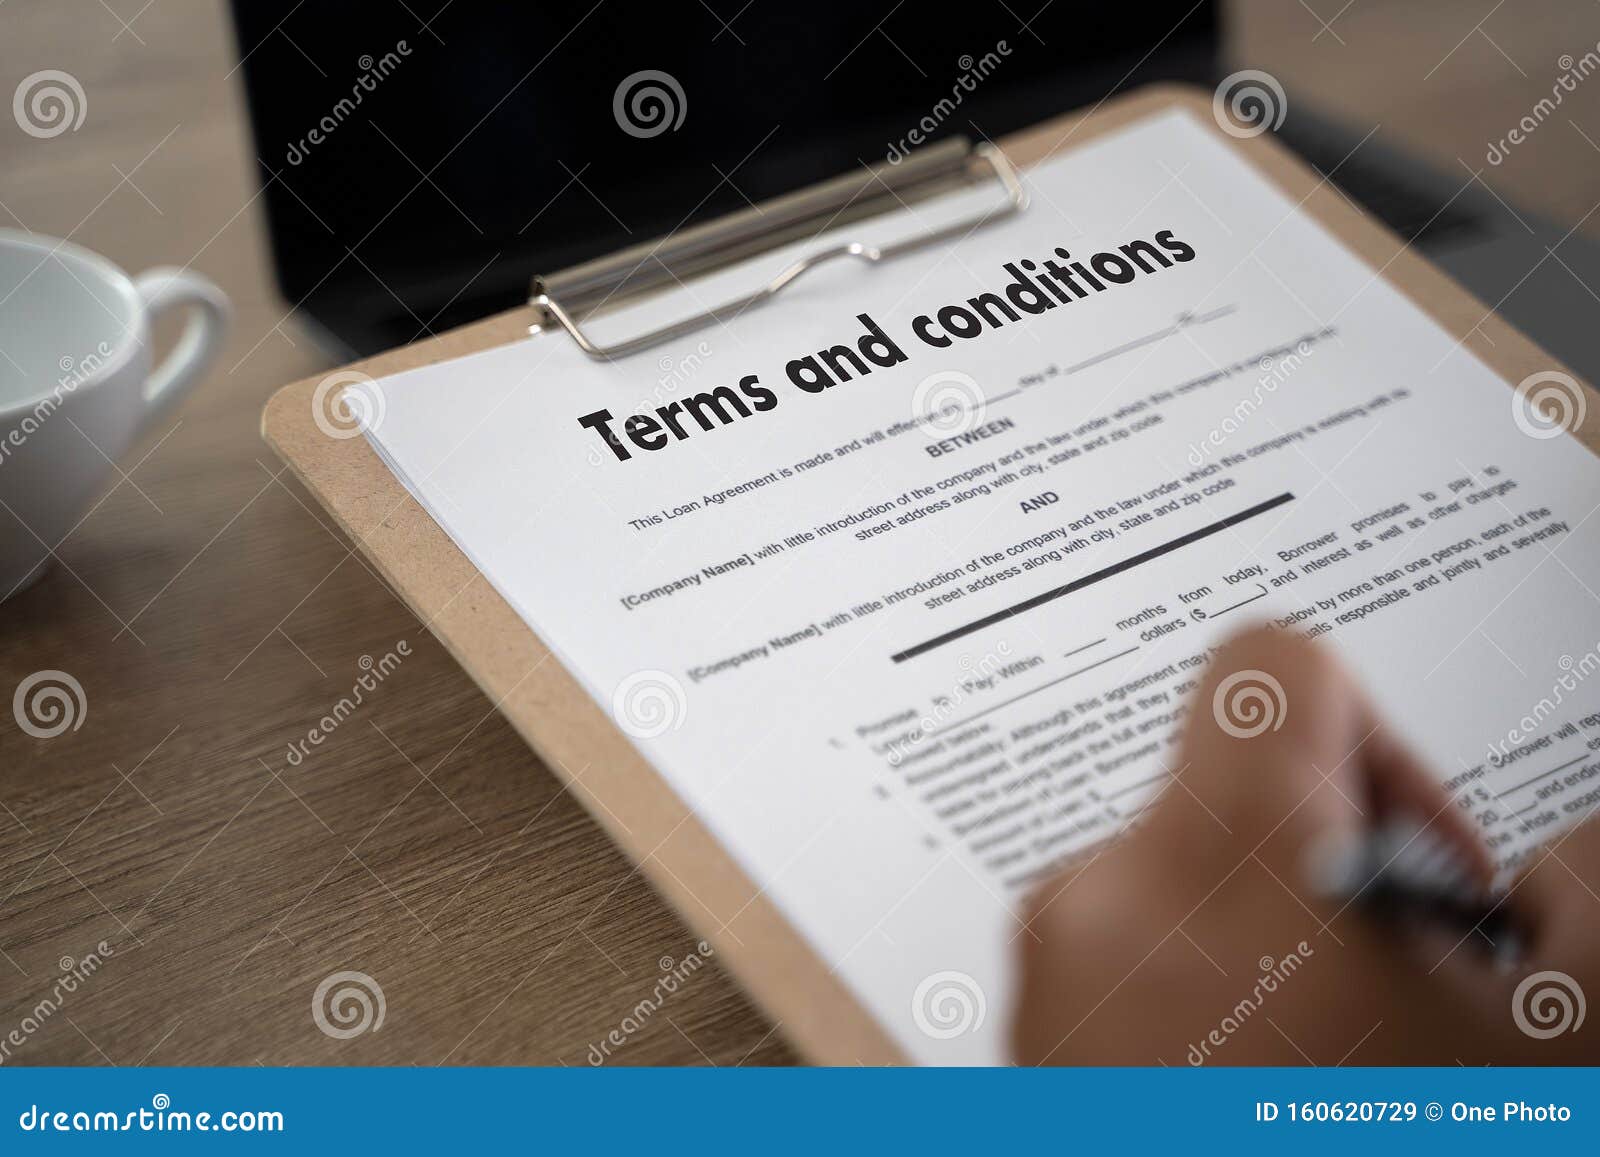 terms of use confirm terms disclaimer conditions to policy service man use pen terms and conditions agreement or document